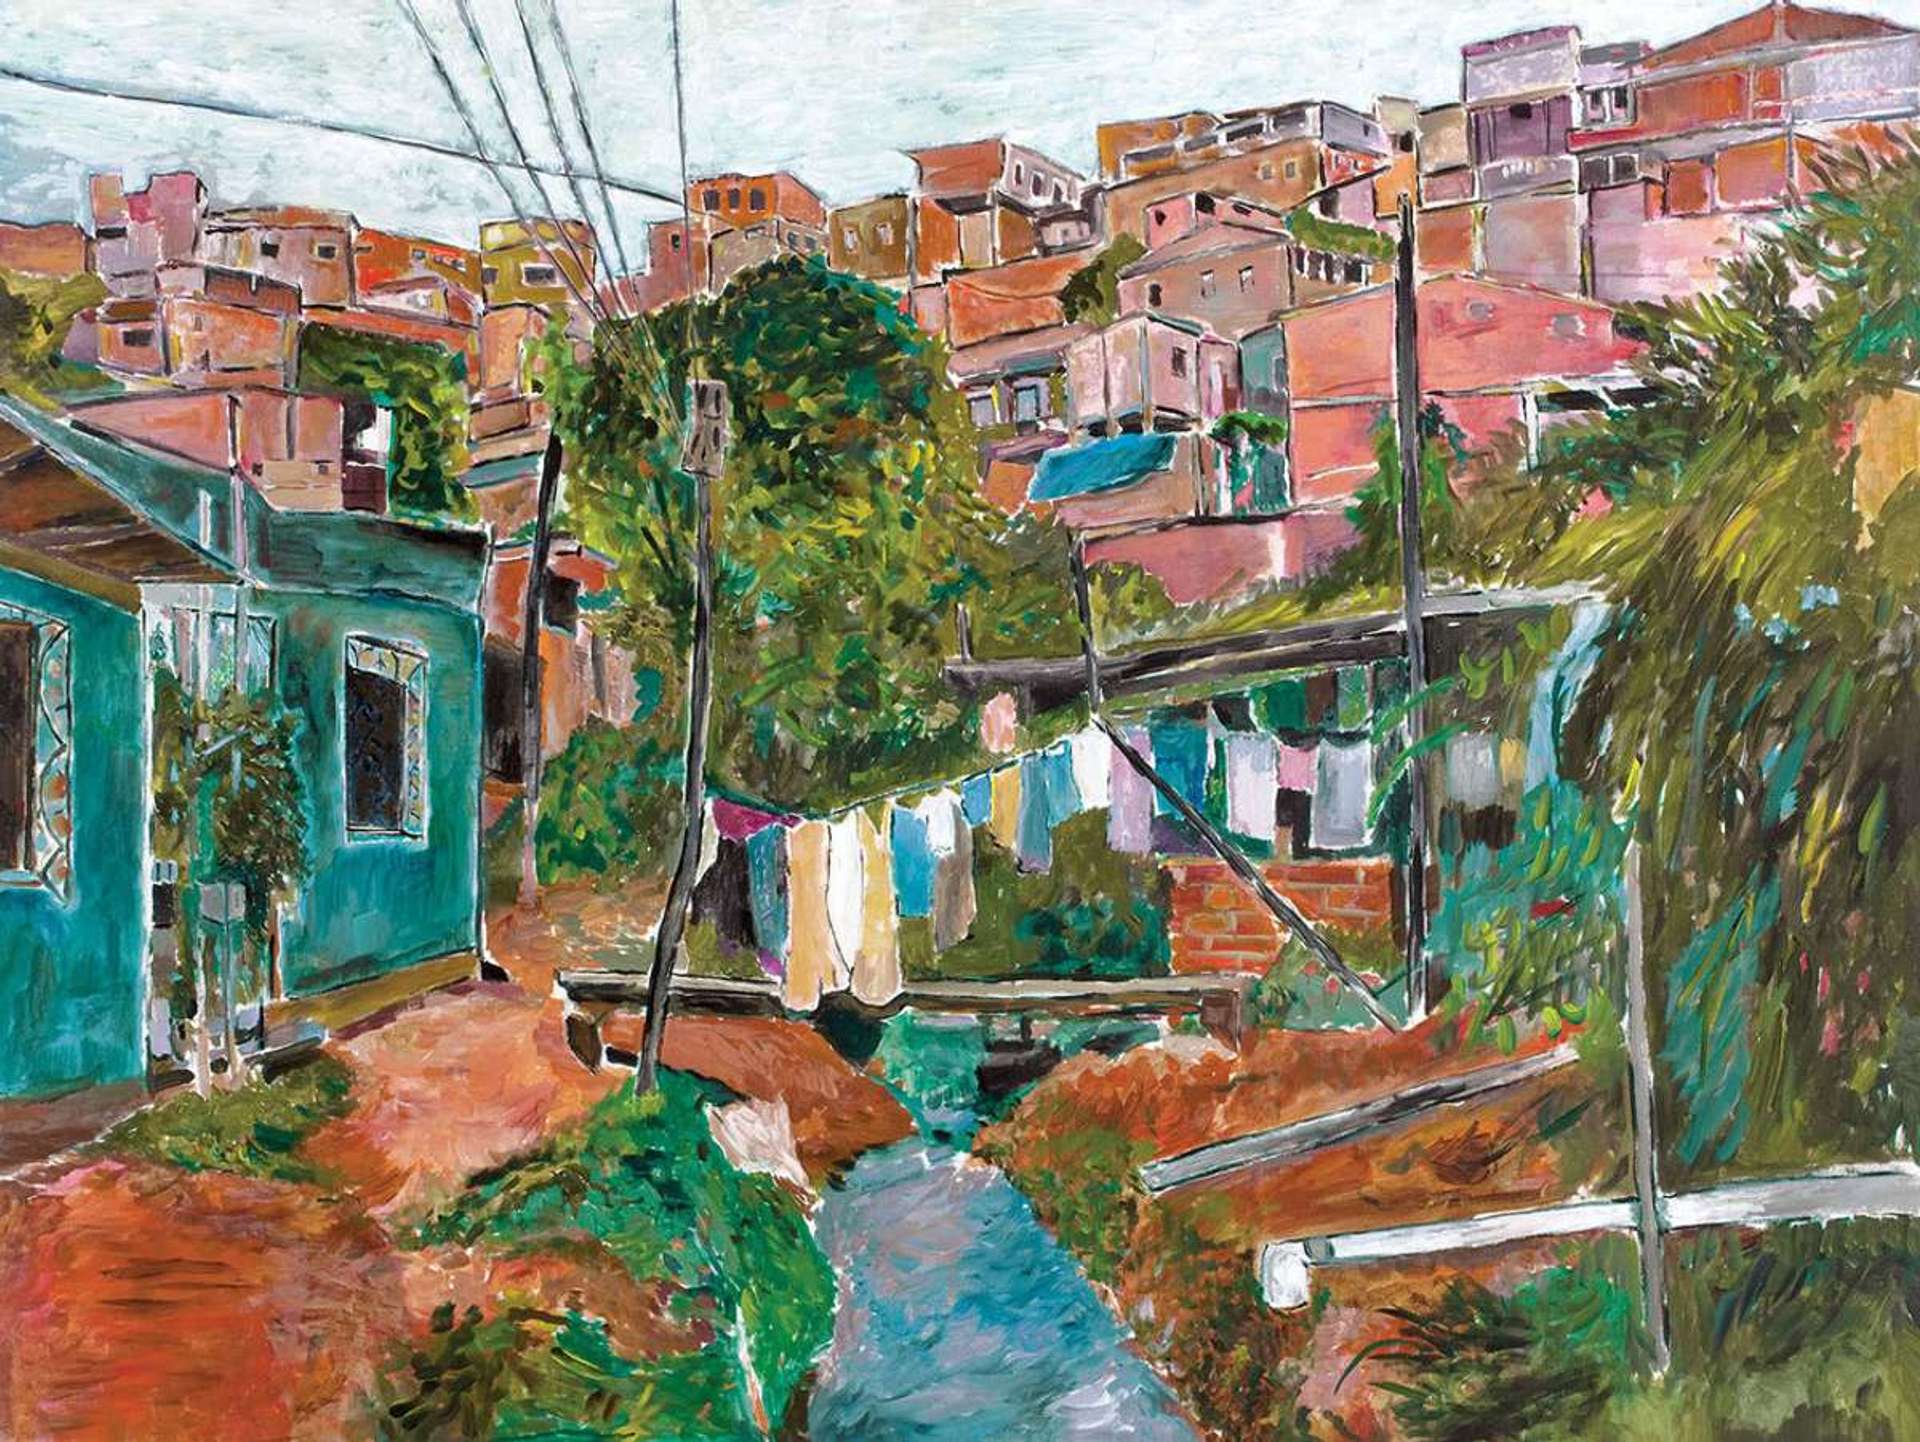 A landscape by artist Bob Dylan. This one depicts a favela in Brazil through fluid brushstrokes. The colour palette is largely composed of oranges and greens.